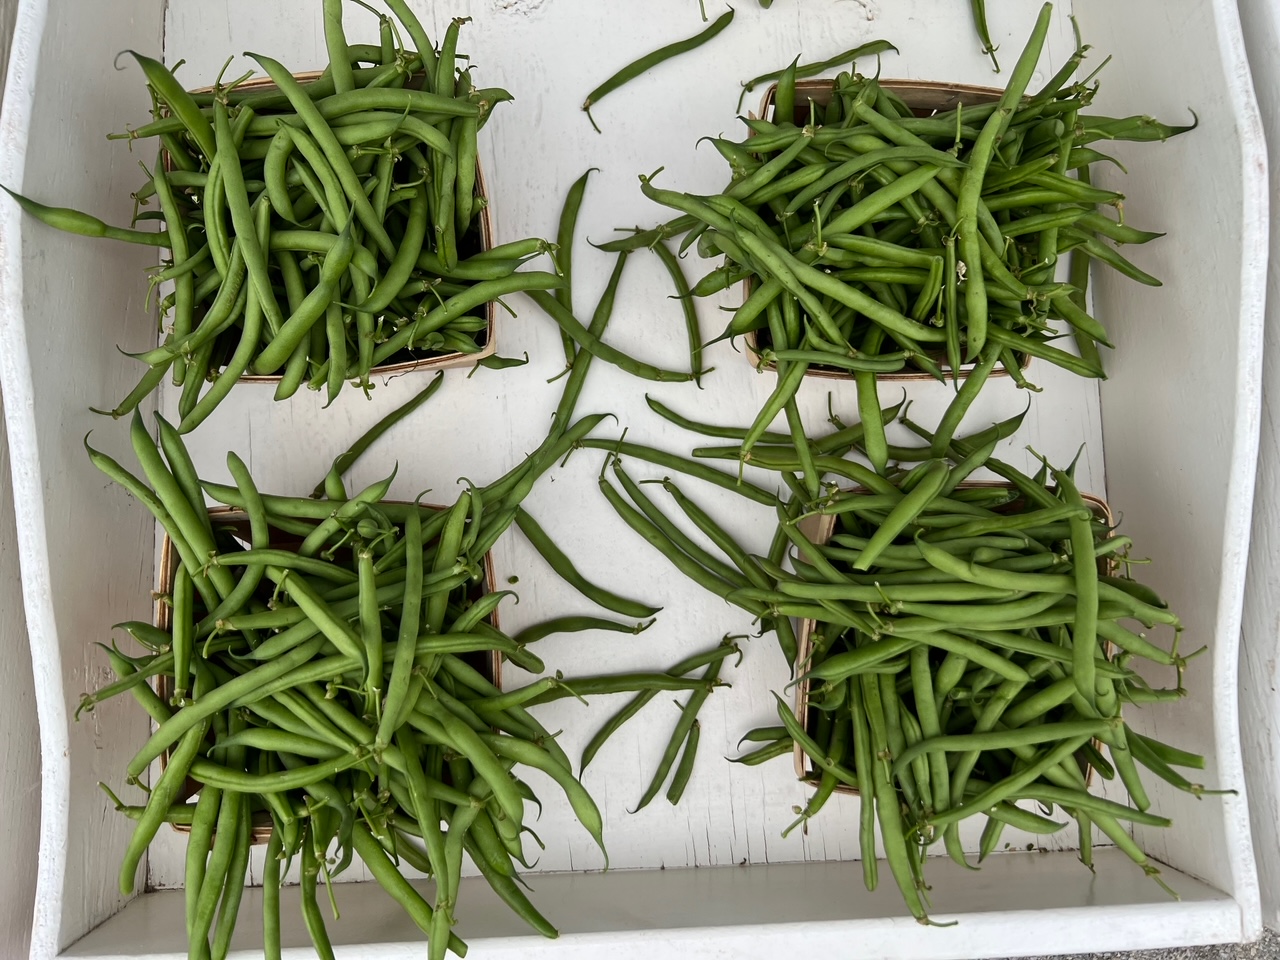 Four overflowing containers of green beans sit in a white shelf at the market. Photo by Alyssa Buckley.